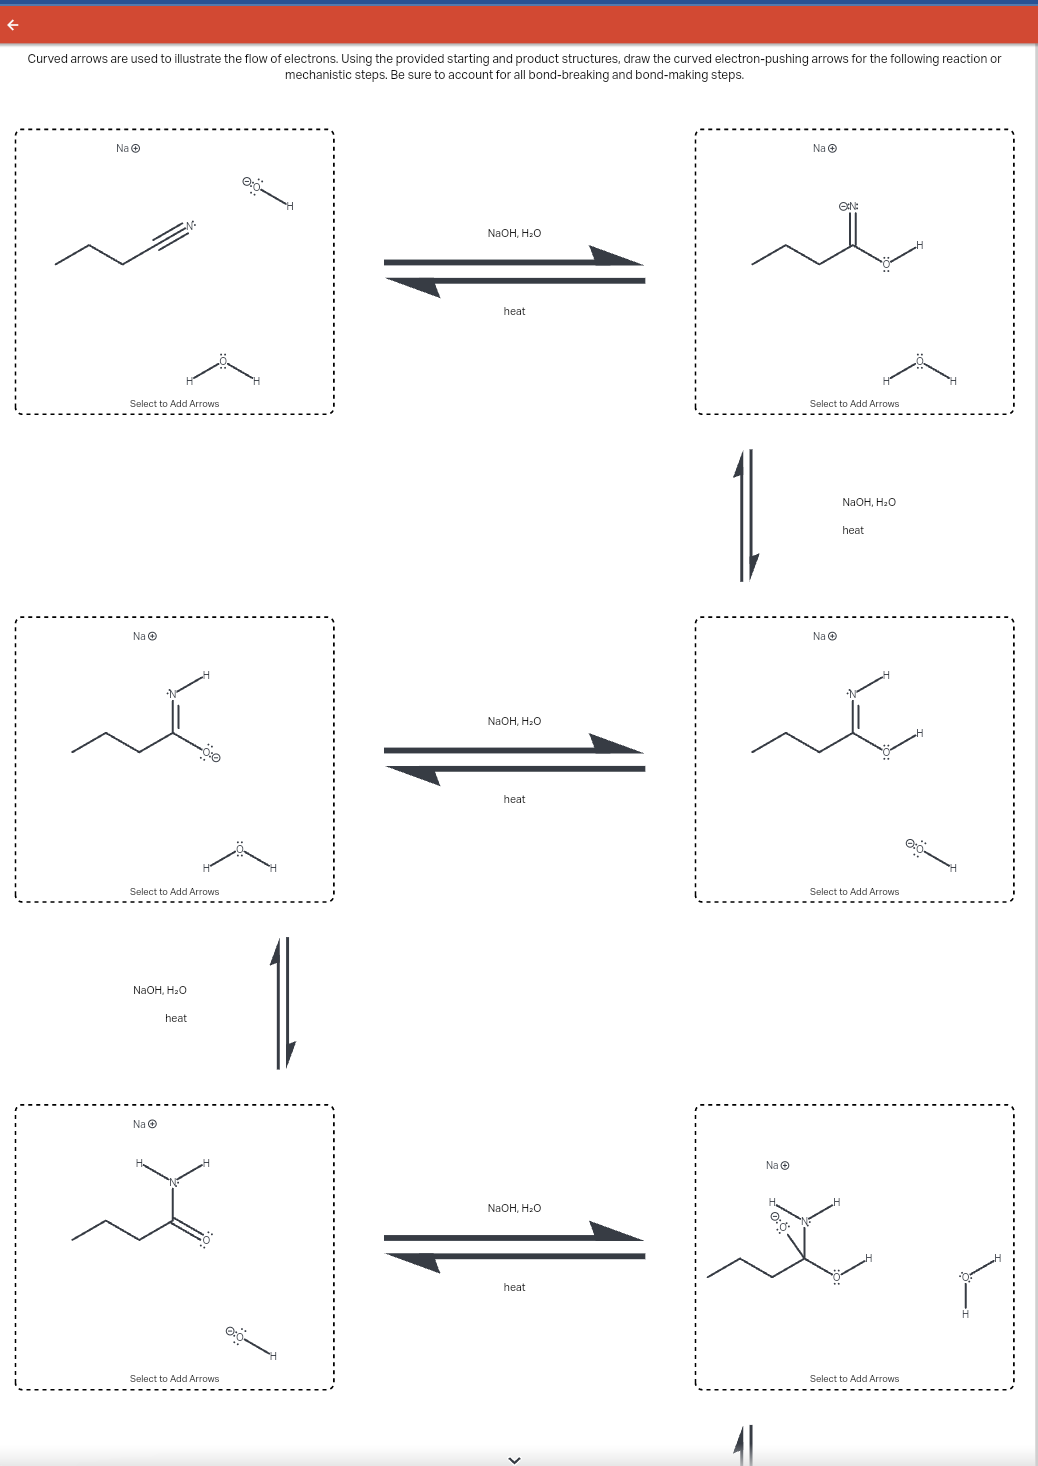 Curved arrows are used to illustrate the flow of electrons. Using the provided starting and product structures, draw the curved electron-pushing arrows for the following reaction or
mechanistic steps. Be sure to account for all bond-breaking and bond-making steps.
Na
Select to Add Arrows
نکه
Select to Add Arrows
NaOH, H₂O
Na Ⓒ
heat
Select to Add Arrows
1.
NaOH, H₂O
heat
NaOH, H₂O
heat
NaOH, H₂O
heat
1
41
Na
Na Ⓒ
ON:
Select to Add Arrows
Na Ⓒ
NaOH, H₂O
é
heat
Select to Add Arrows
Select to Add Arrows